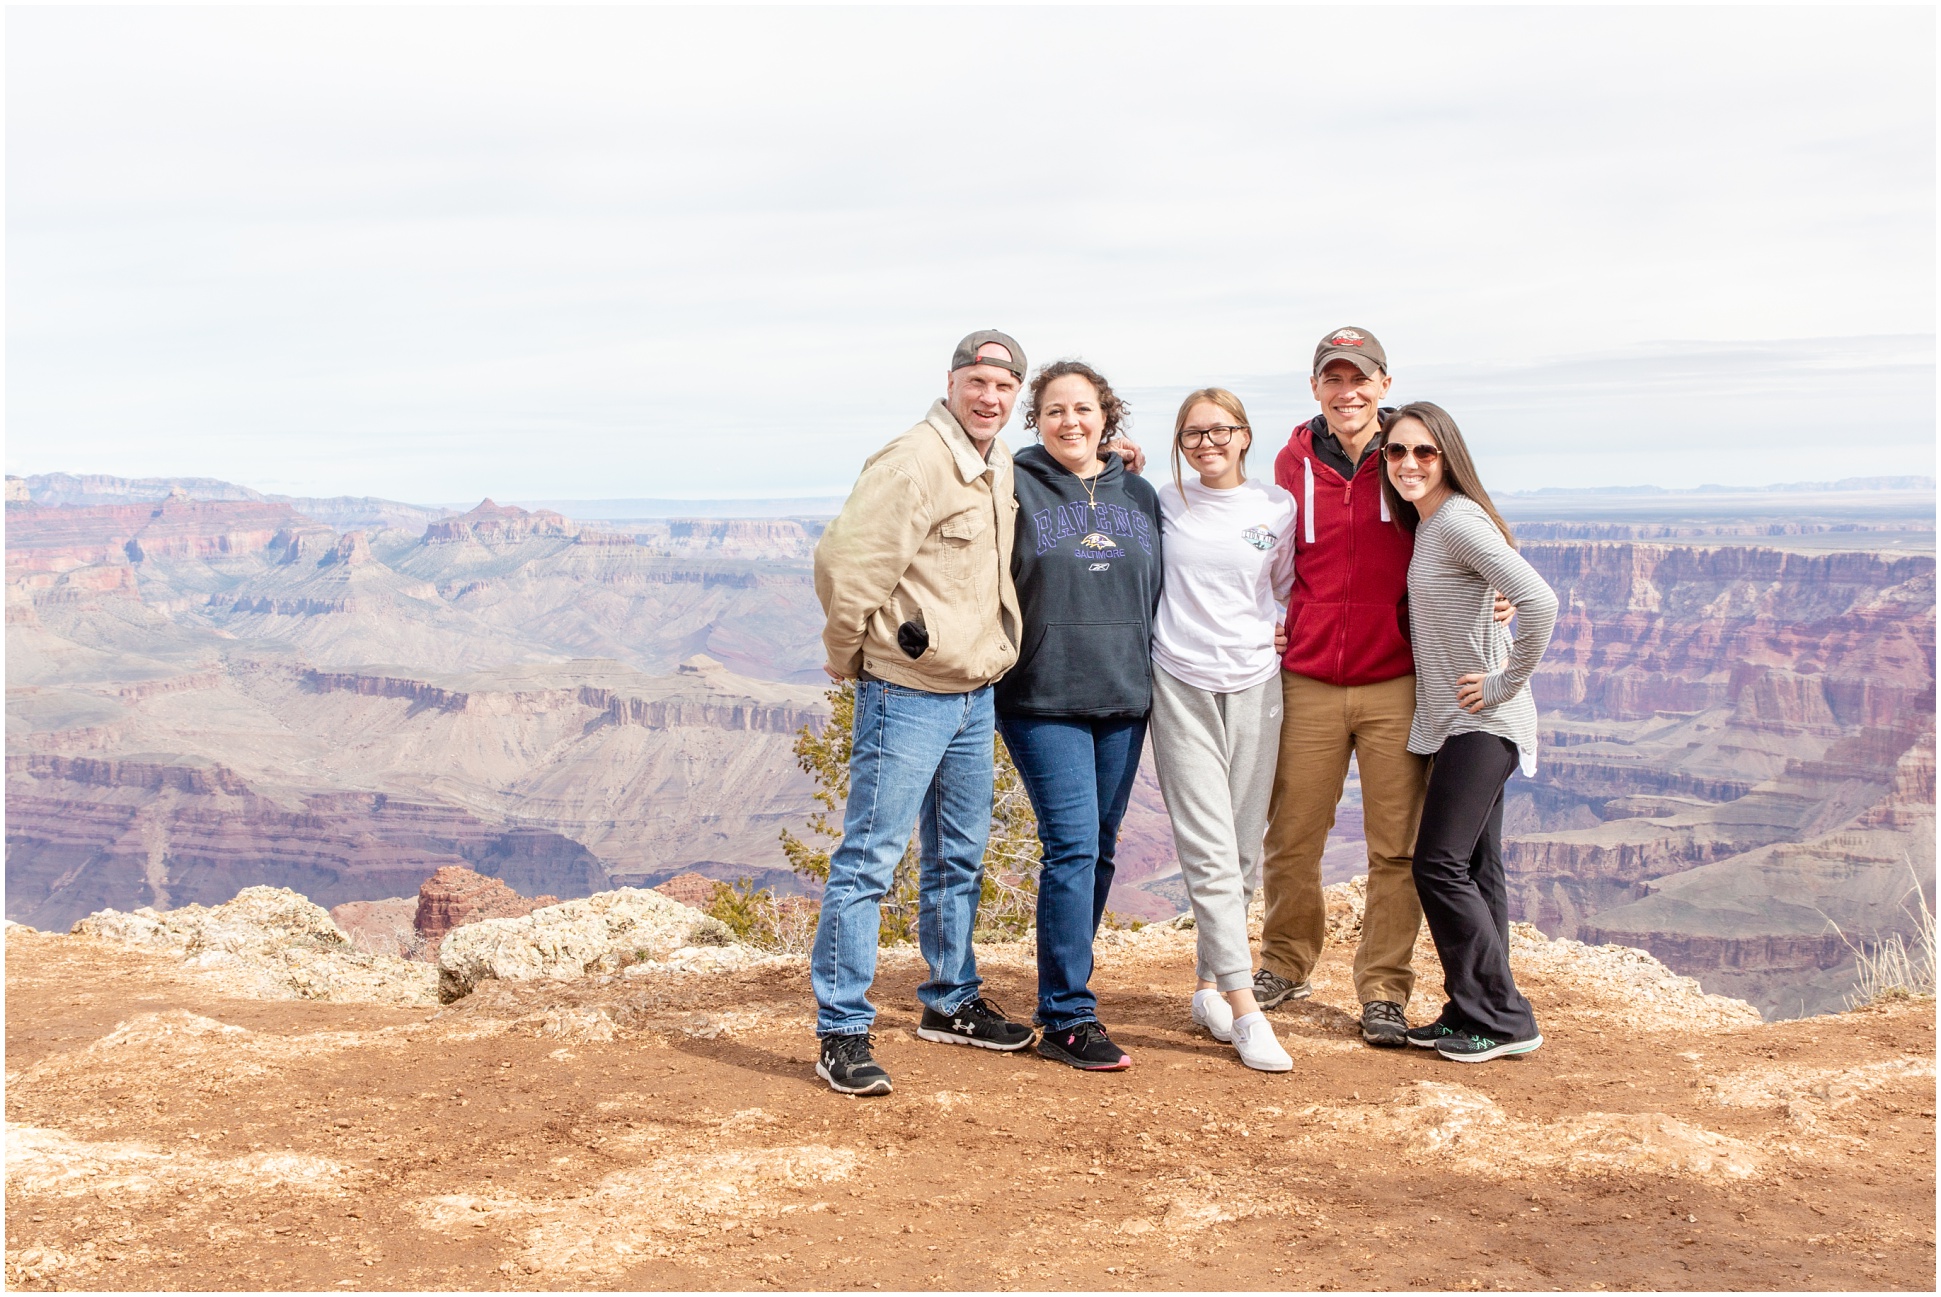 Charlie, Wendy, Katlyn, Michael, and Jessica standing at the Grand Canyon